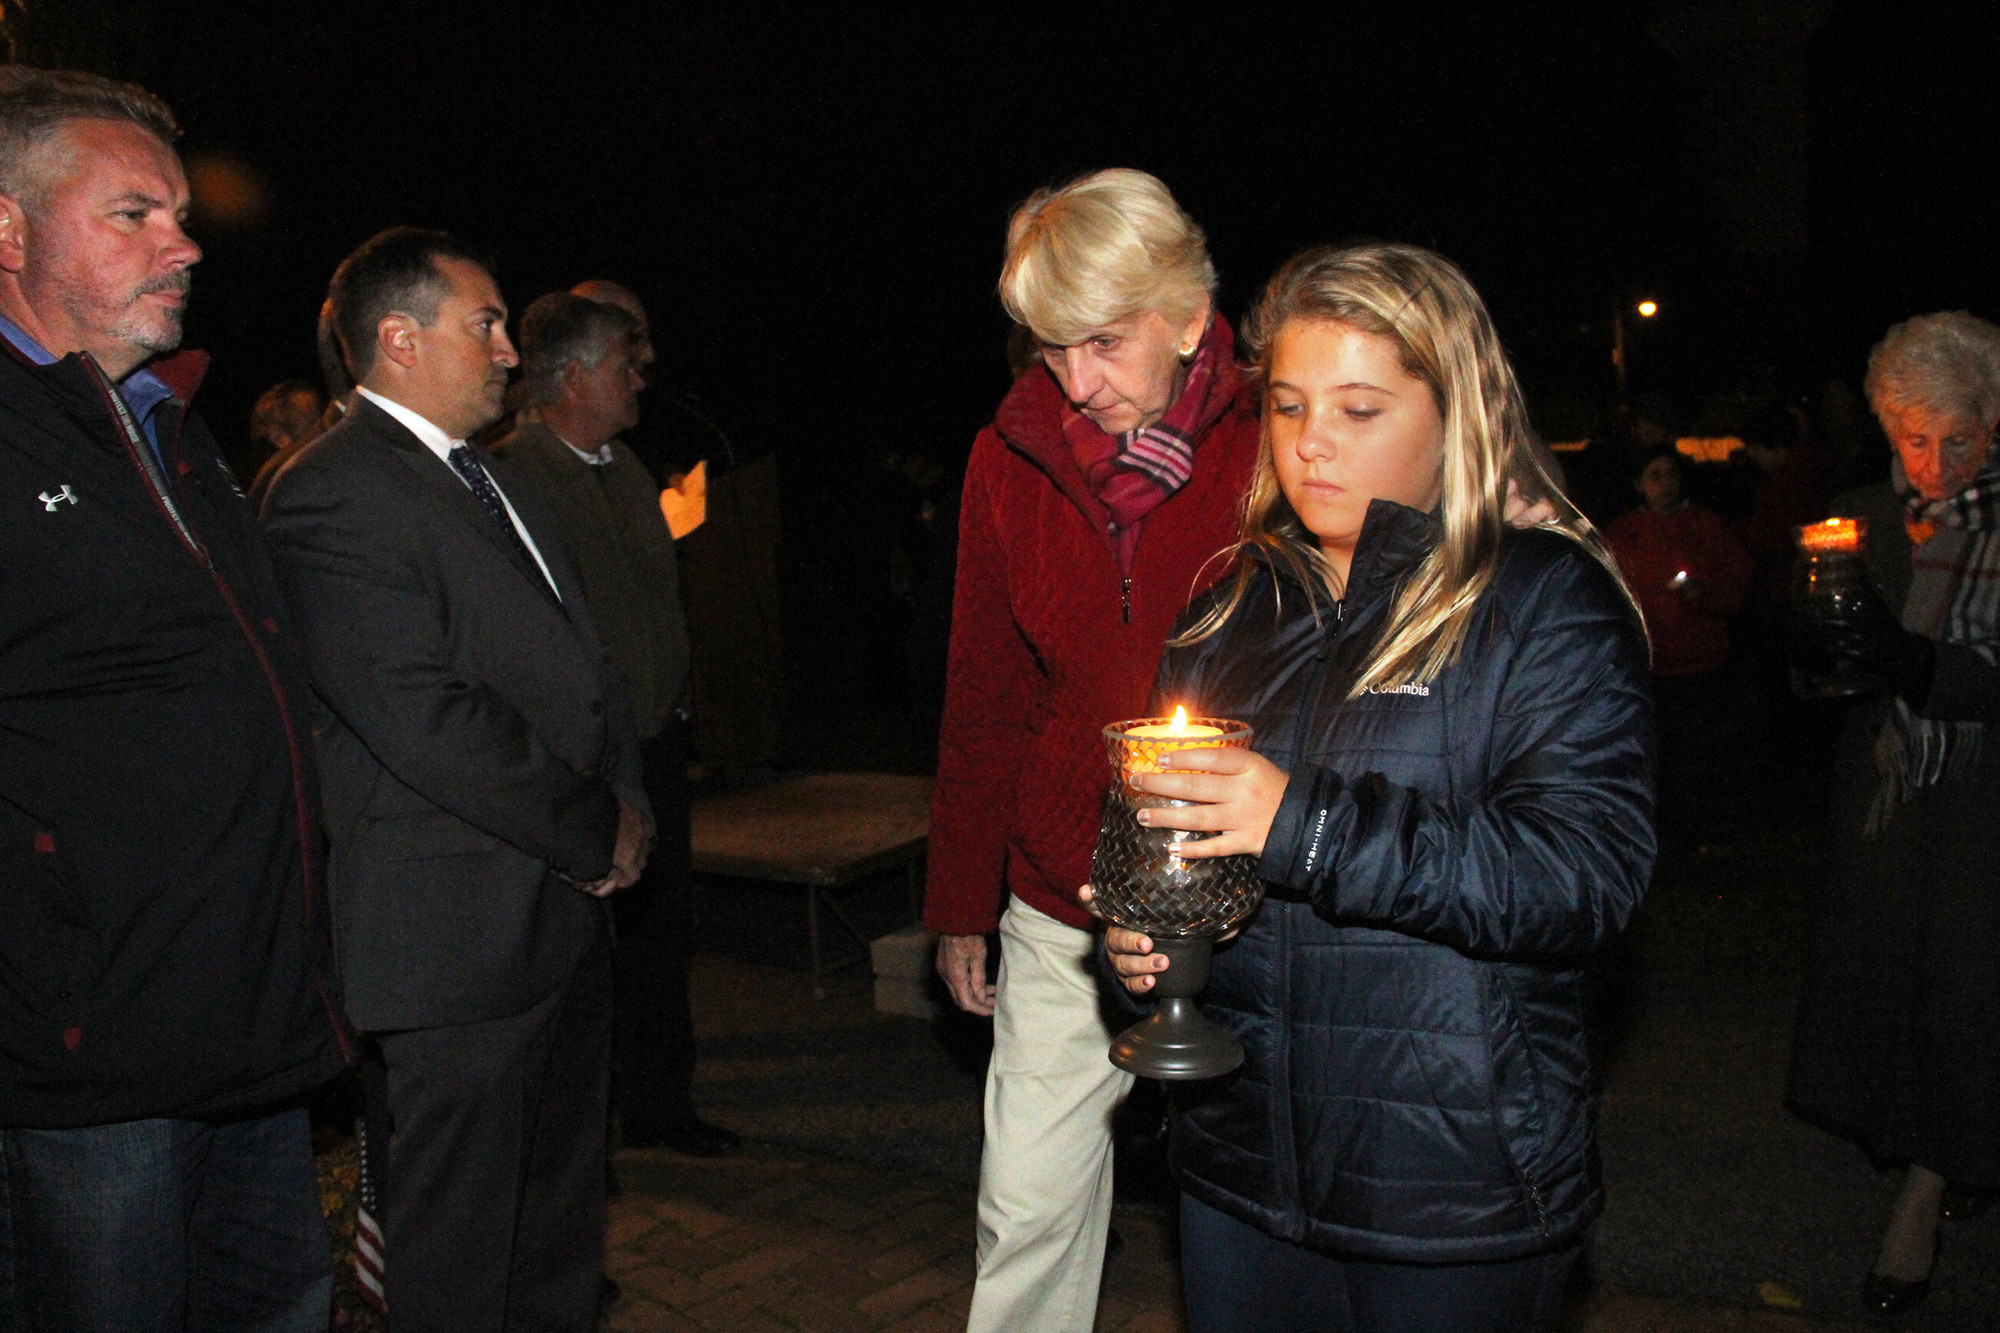 Members of the Logler family brought candles to the memorial ceremony.